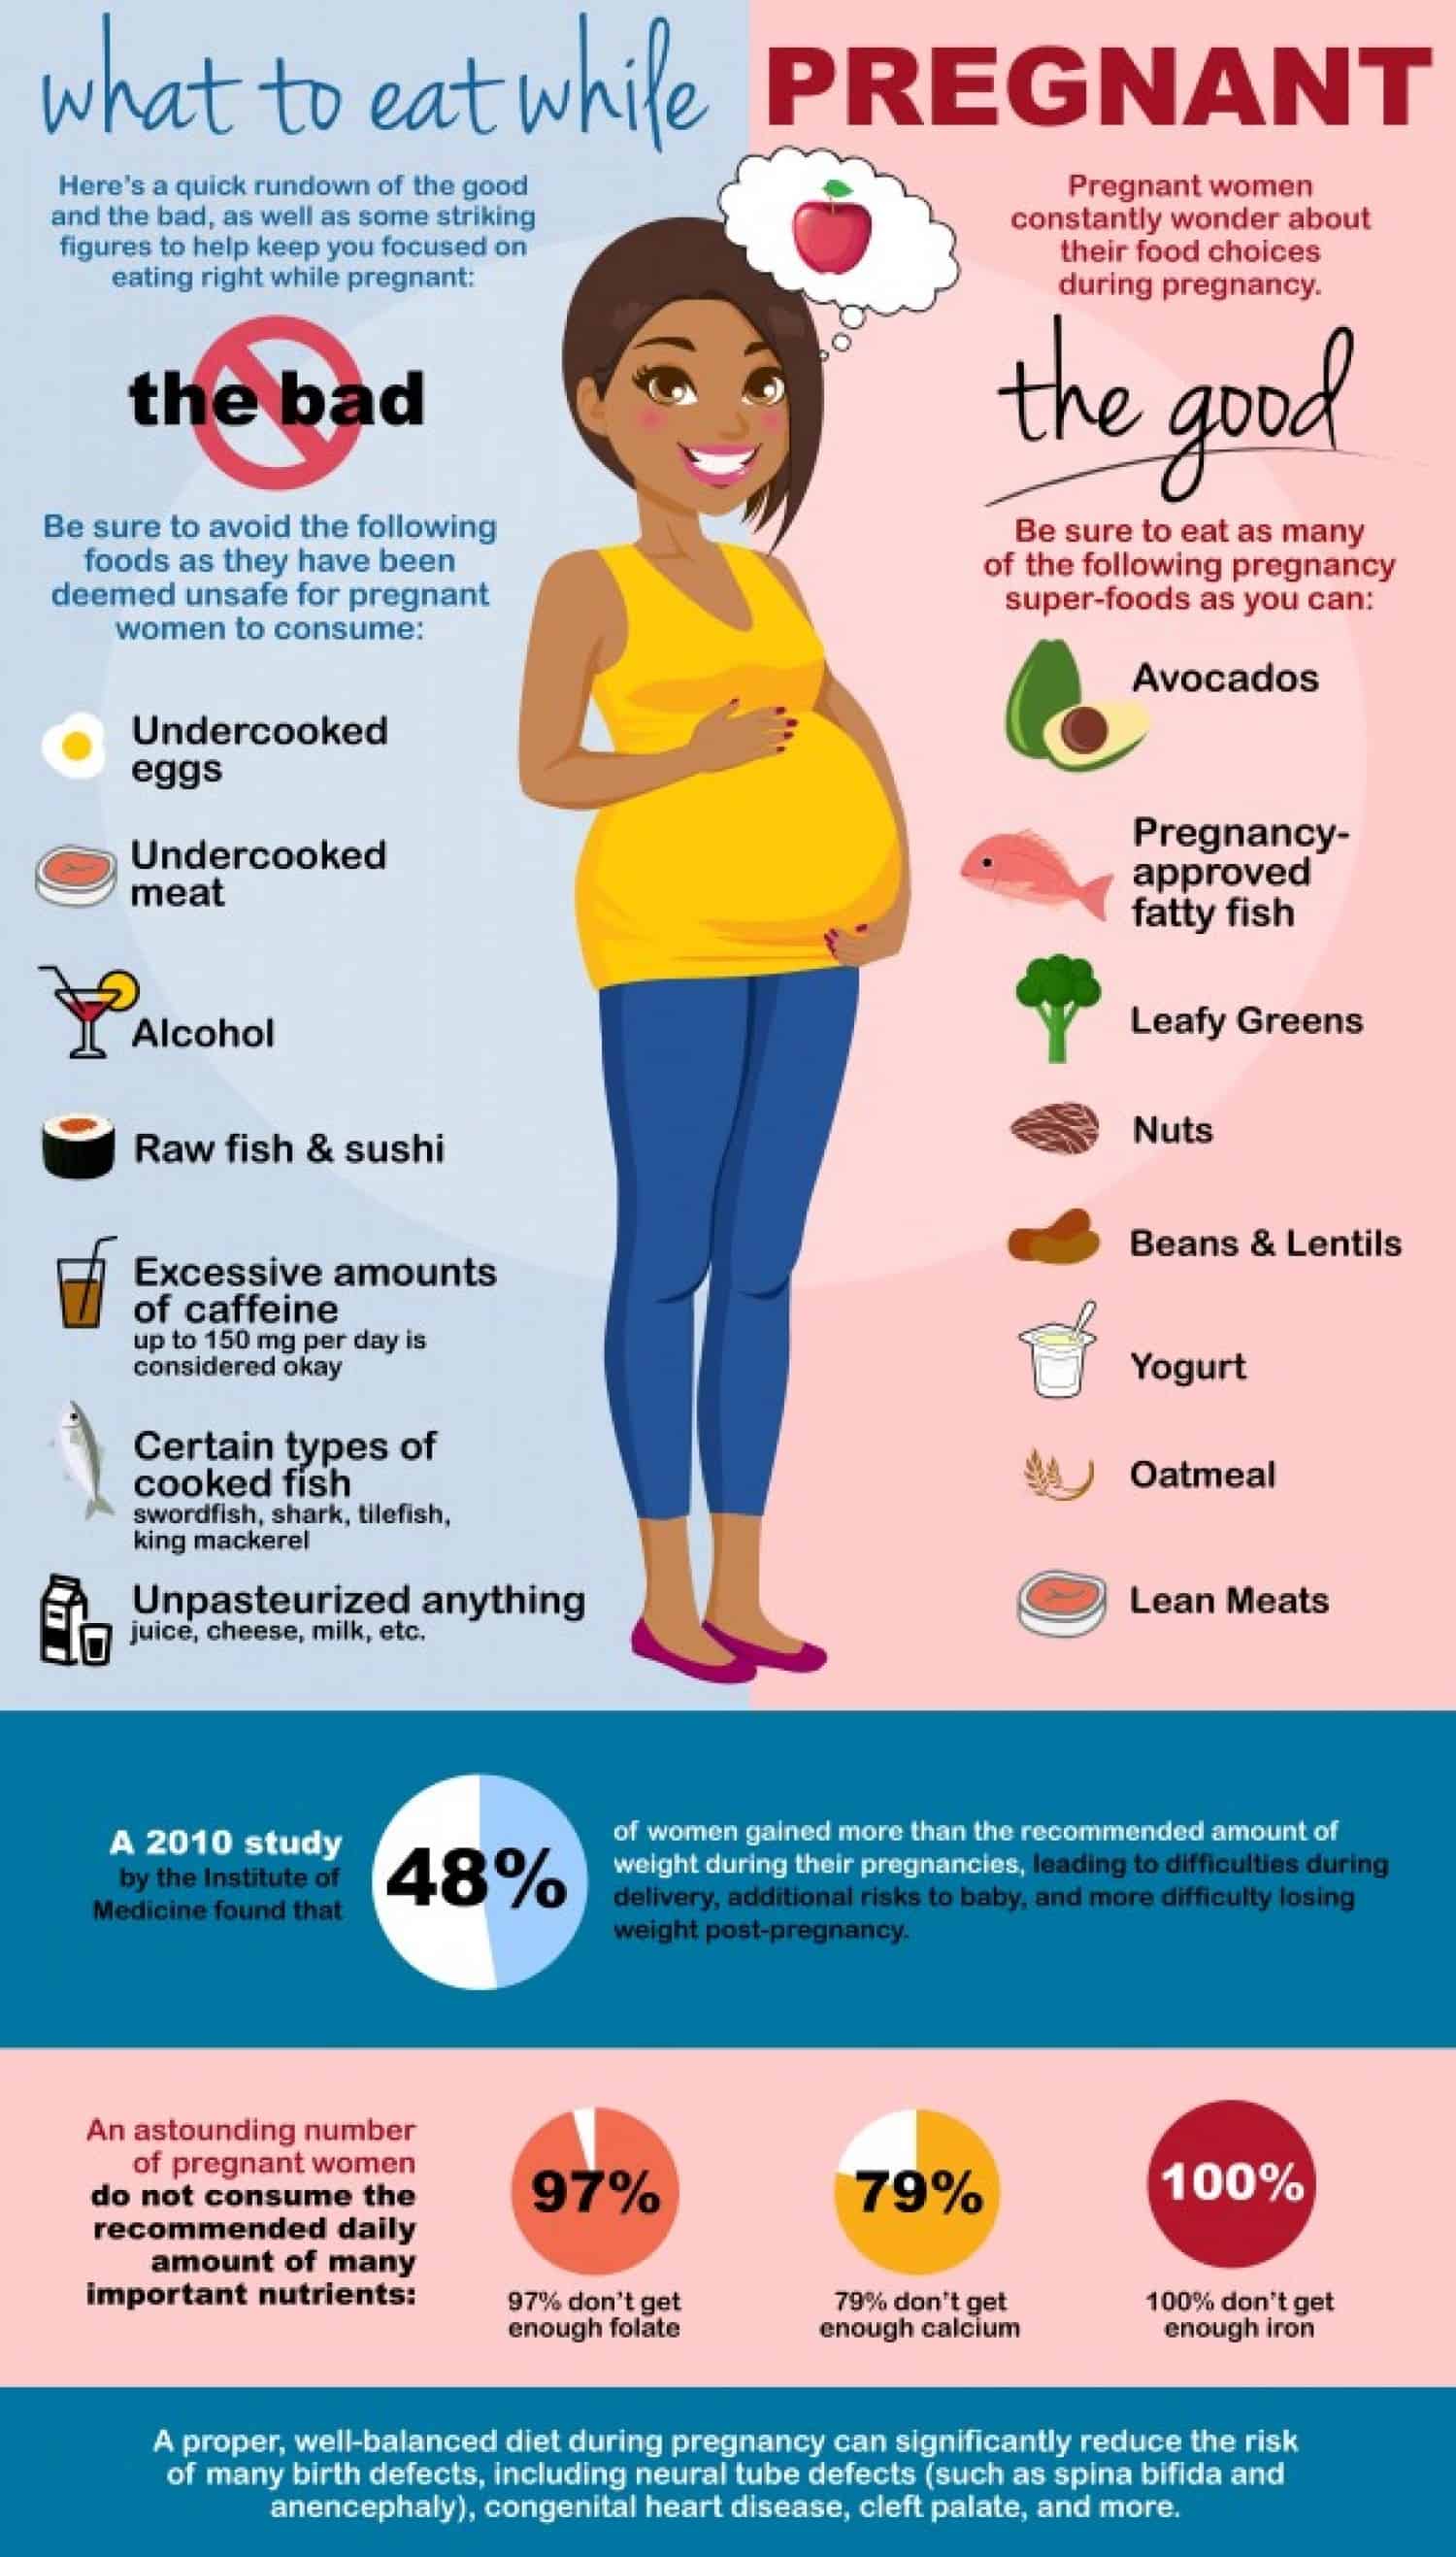 If You’re Pregnant, Stay Away From These Foods | Daily Infographic